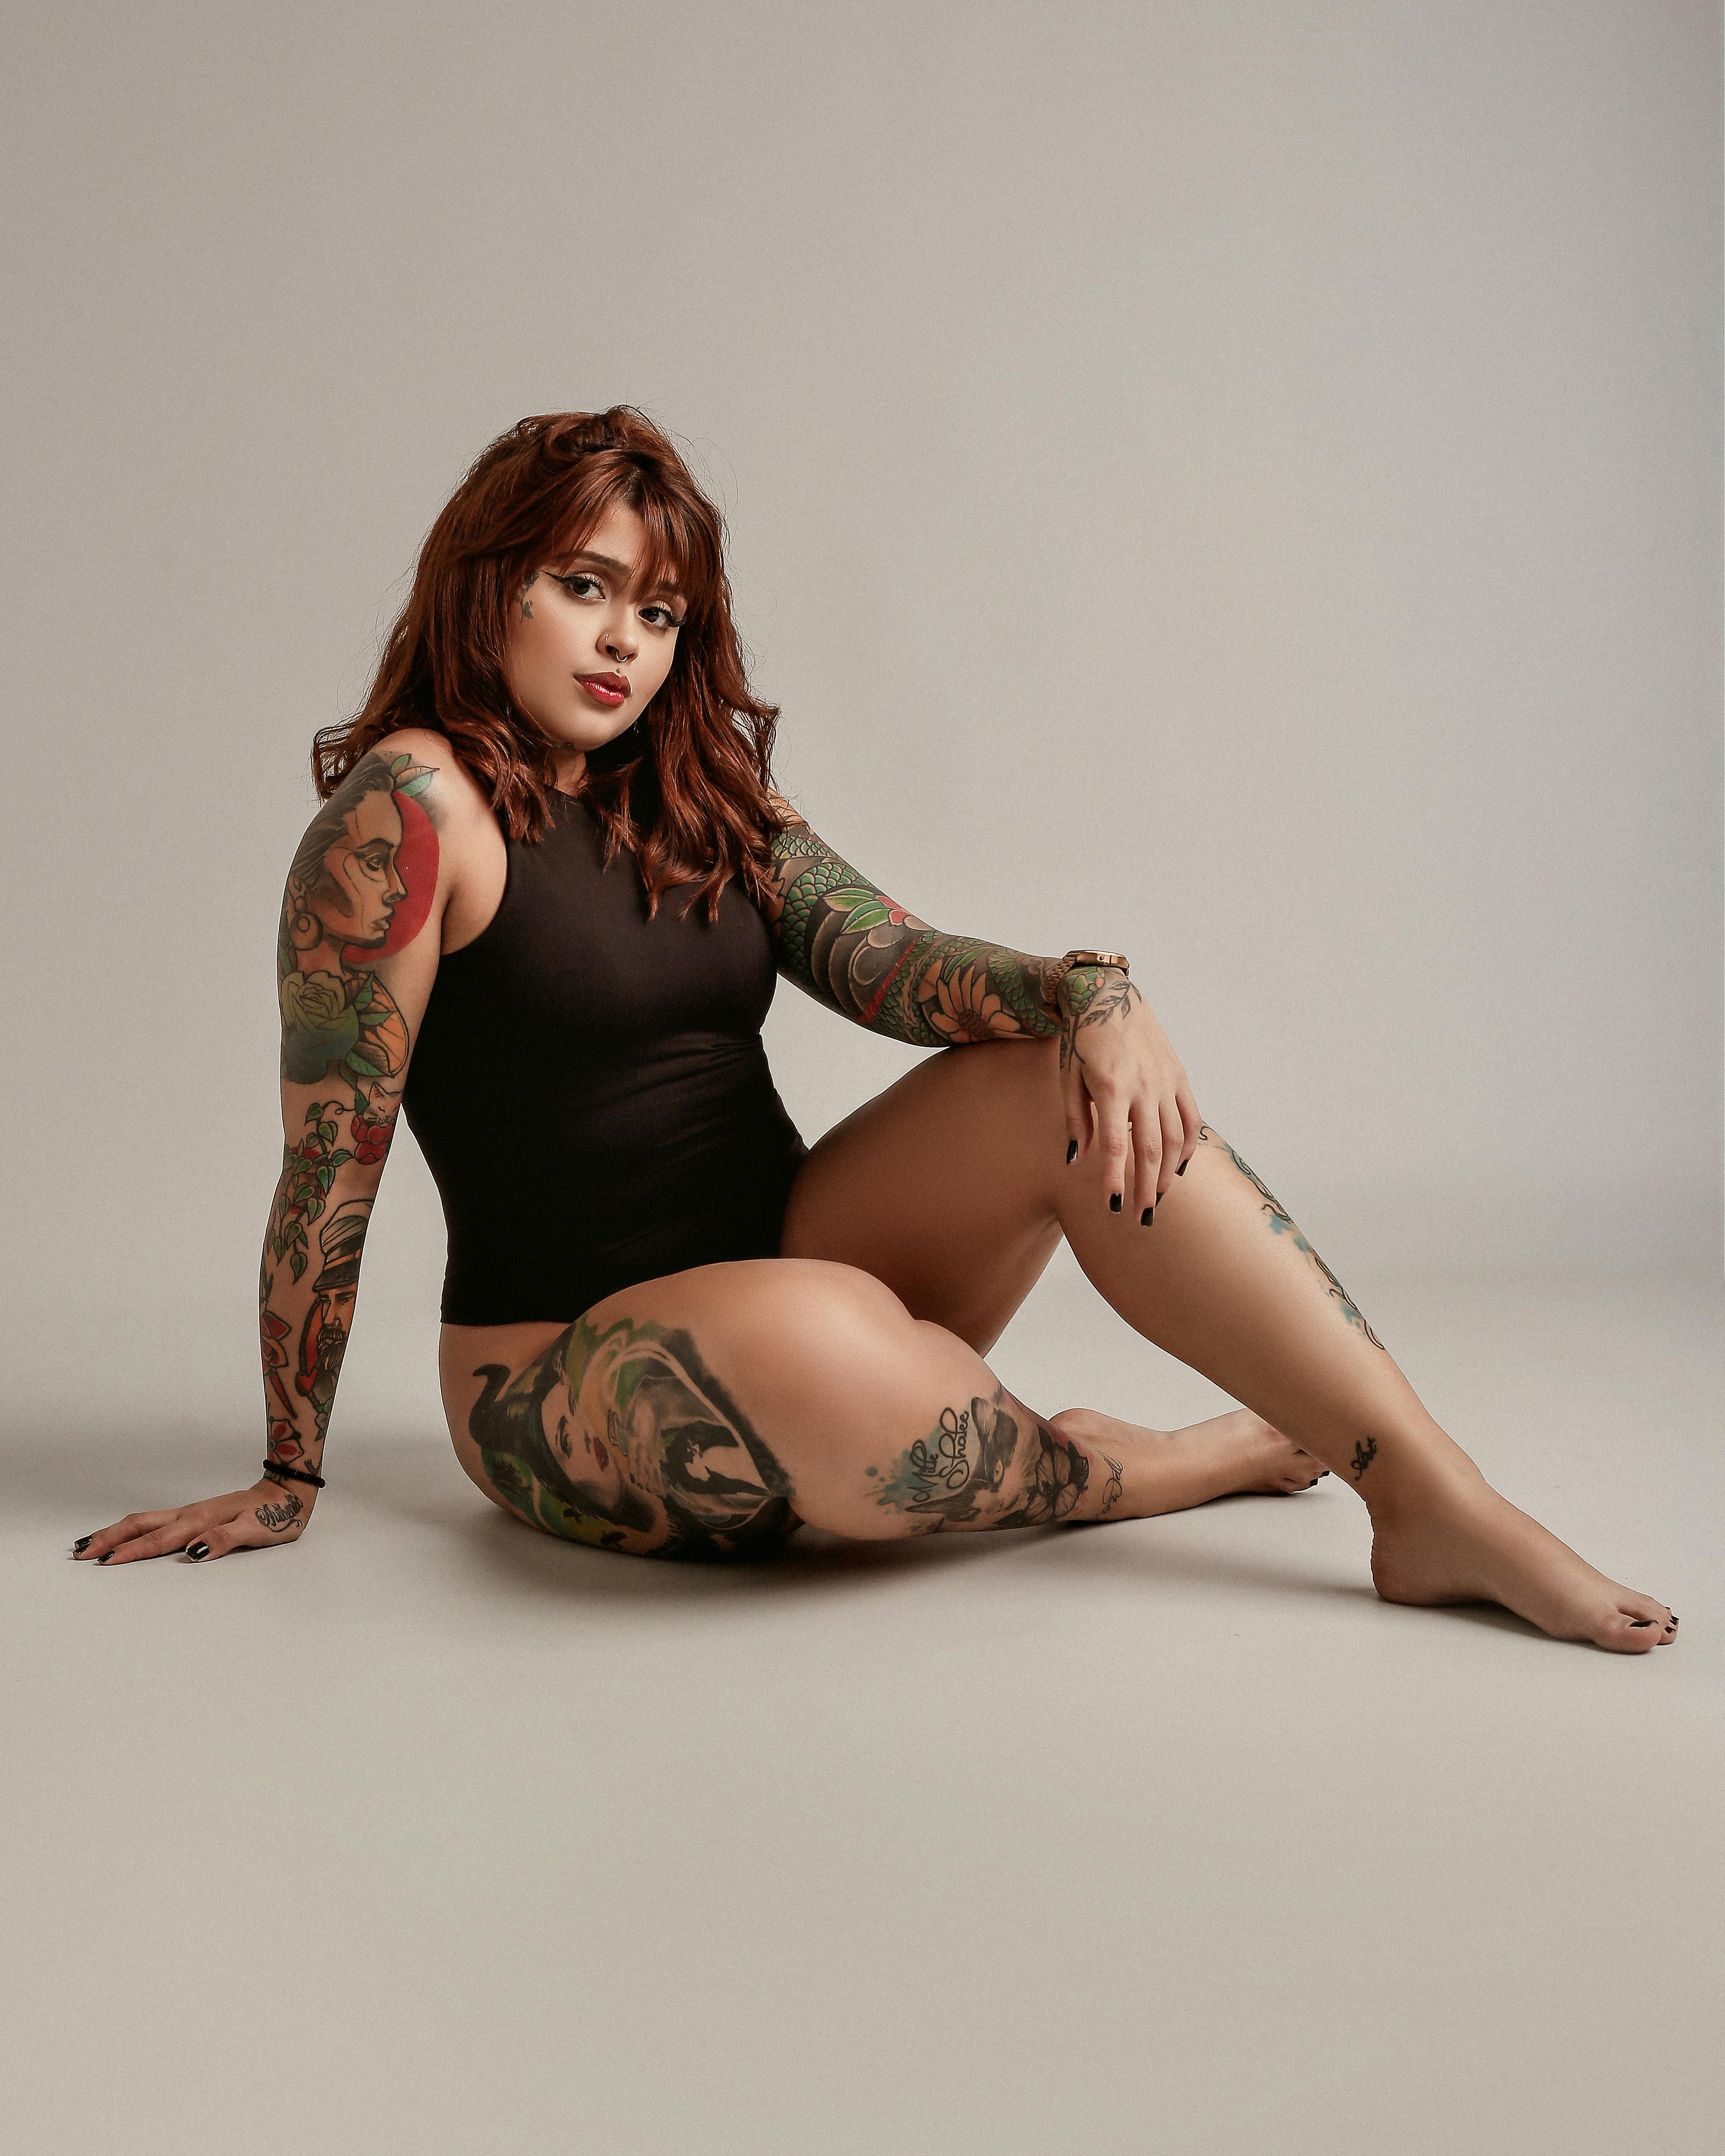 https://images.pexels.com/photos/18824523/pexels-photo-18824523/free-photo-of-model-with-tattoos-posing-in-bodysuit.jpeg